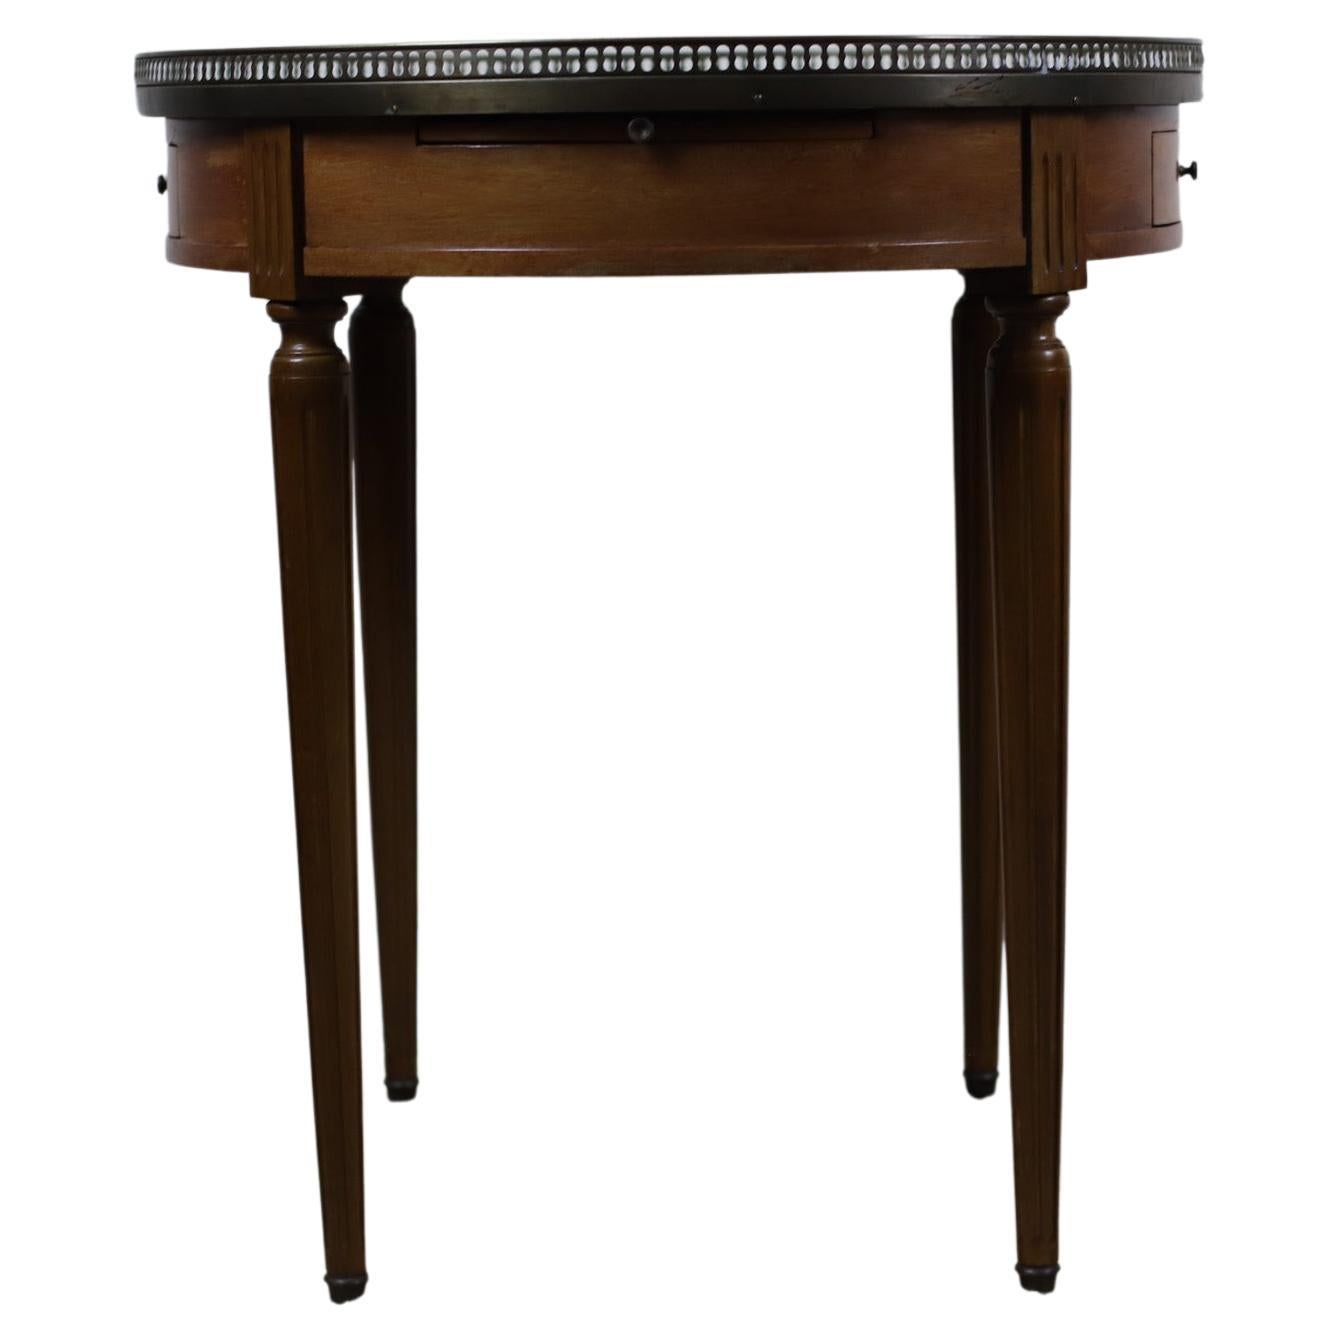 
A 20th century French walnut white marble-topped Bouillotte centre table.
Elegant Bouillotte Table in Walnut with a Grey veined White Marble, surrounded by a Gallery made of a stamped and profiled Brass band.
This piece of furniture takes its